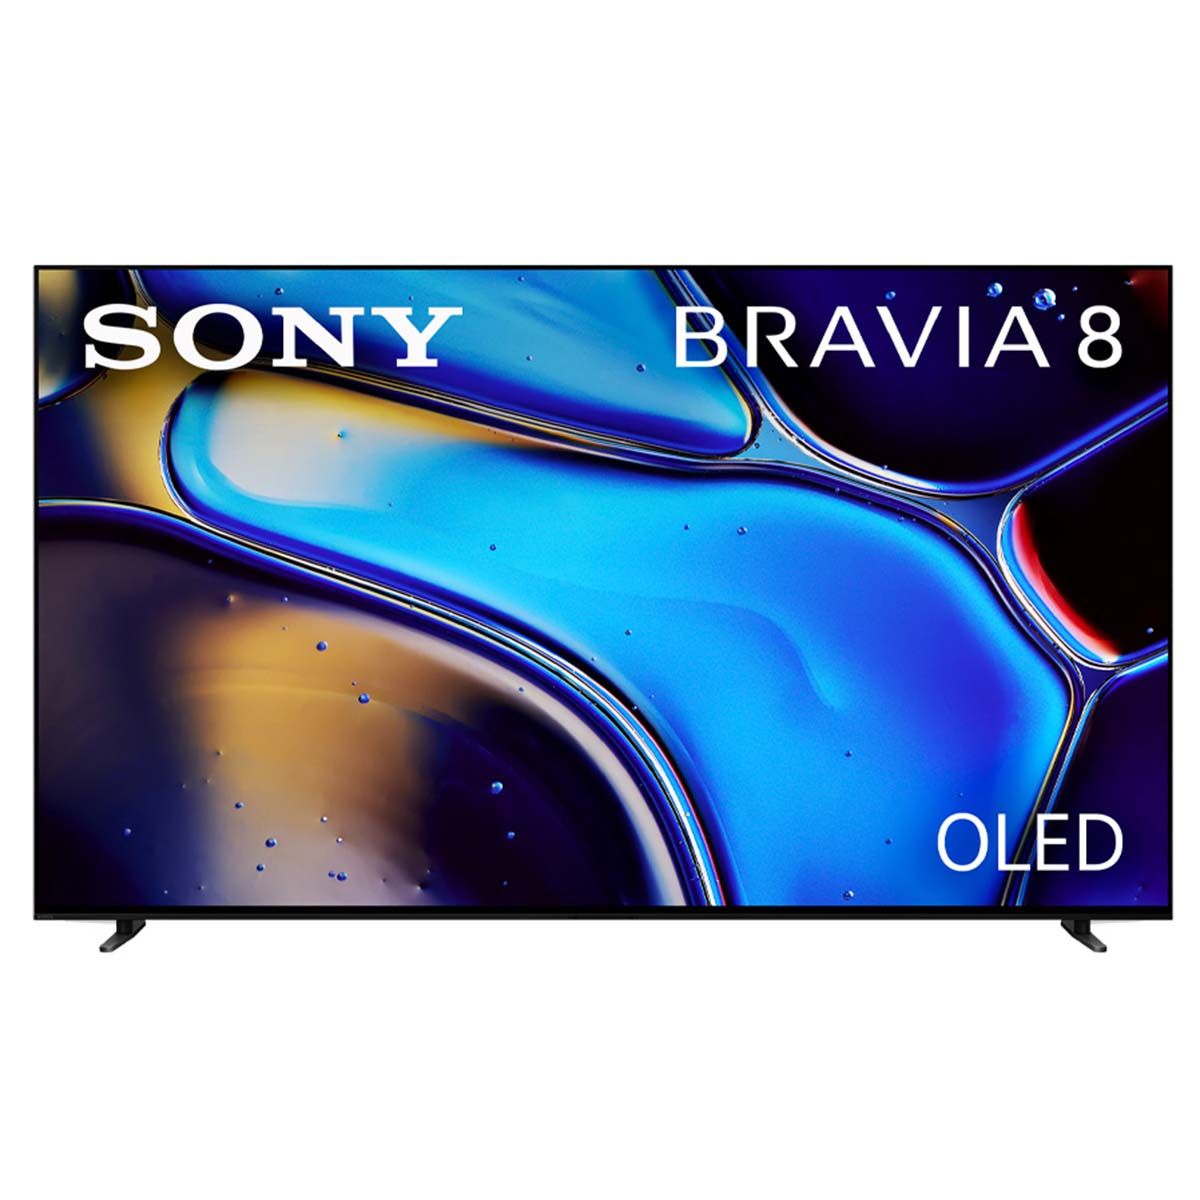 Sony BRAVIA 8 OLED 4K HDR Google TV (2024) - front view with Sony text